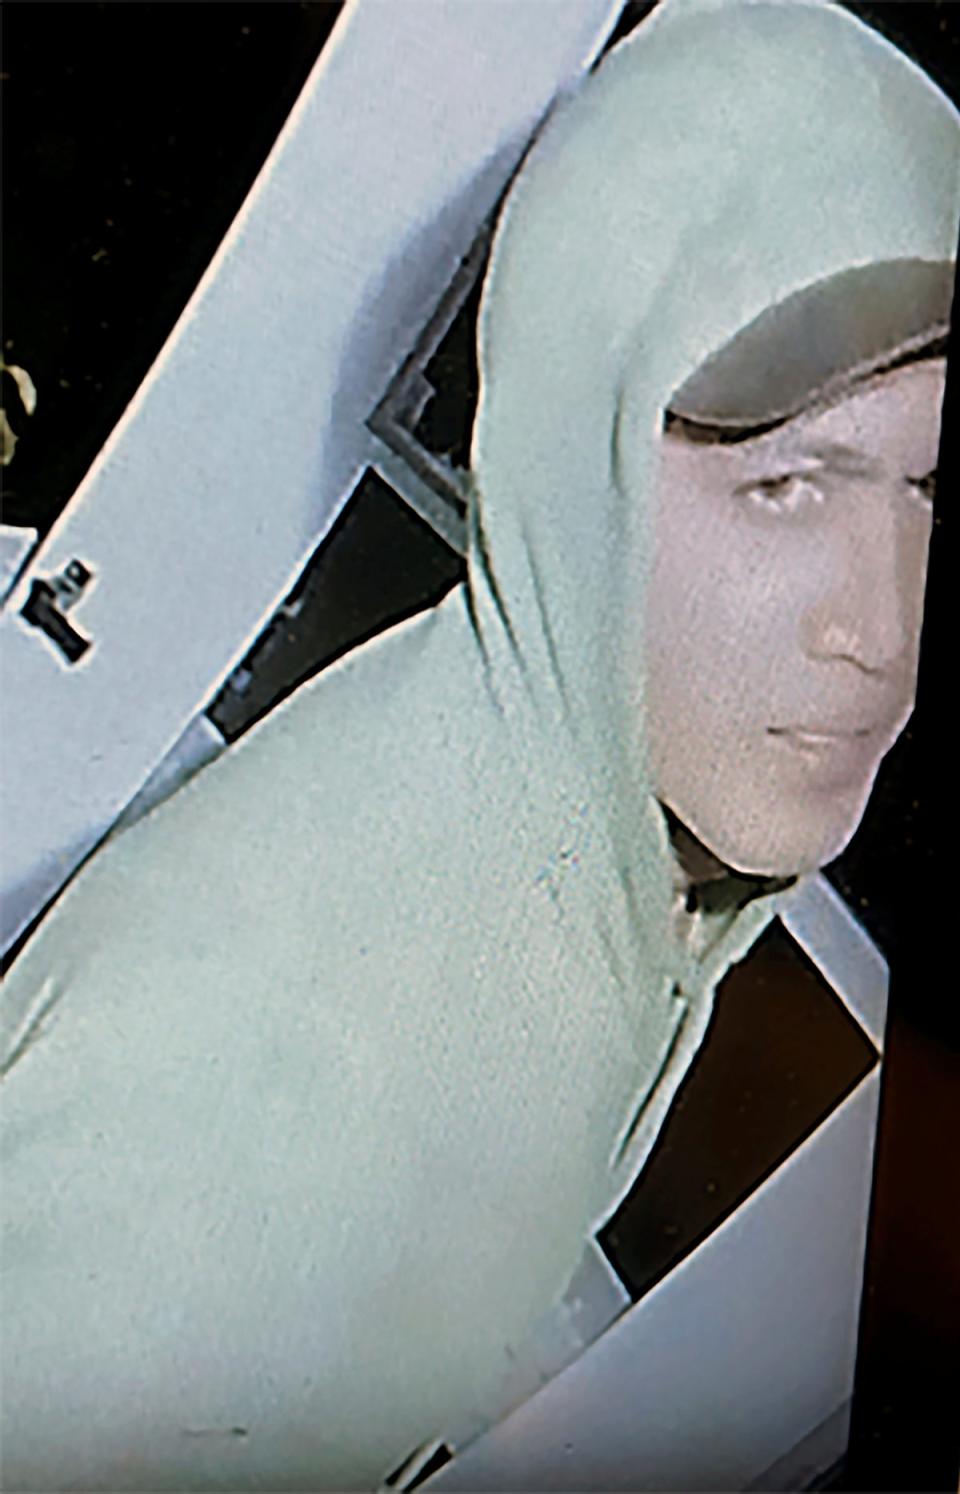 An image provided by the Pennsylvania State Police showing Cavalcante wearing a hoodie (Pennsylvania State Police)